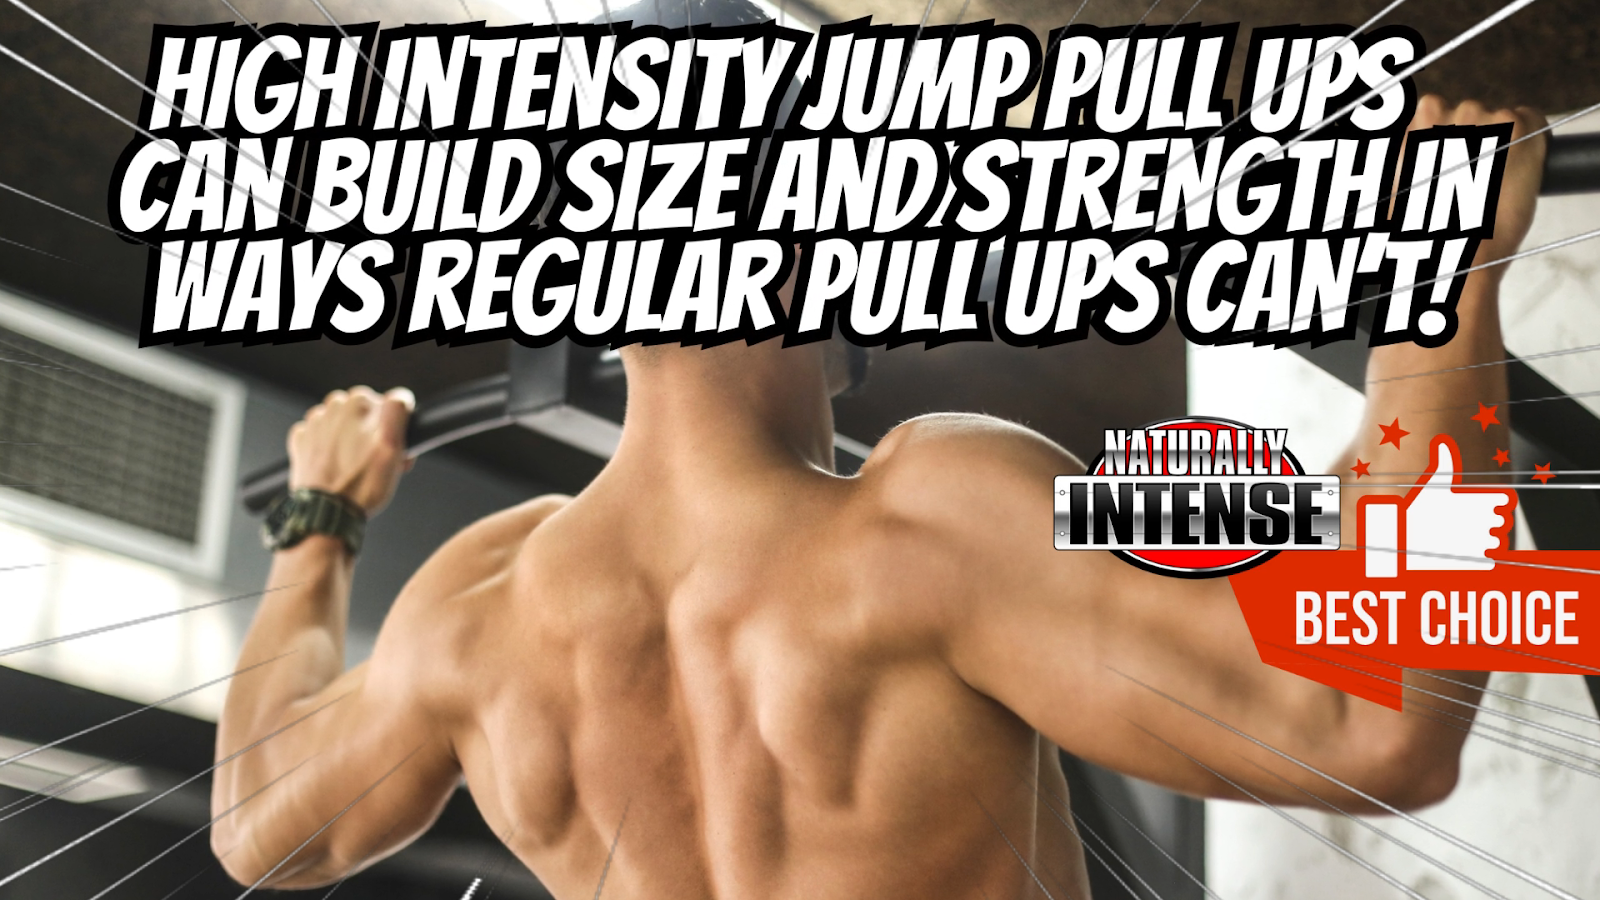 Jump pull-ups are strongly recommended for those who can't do pull ups for overall back development